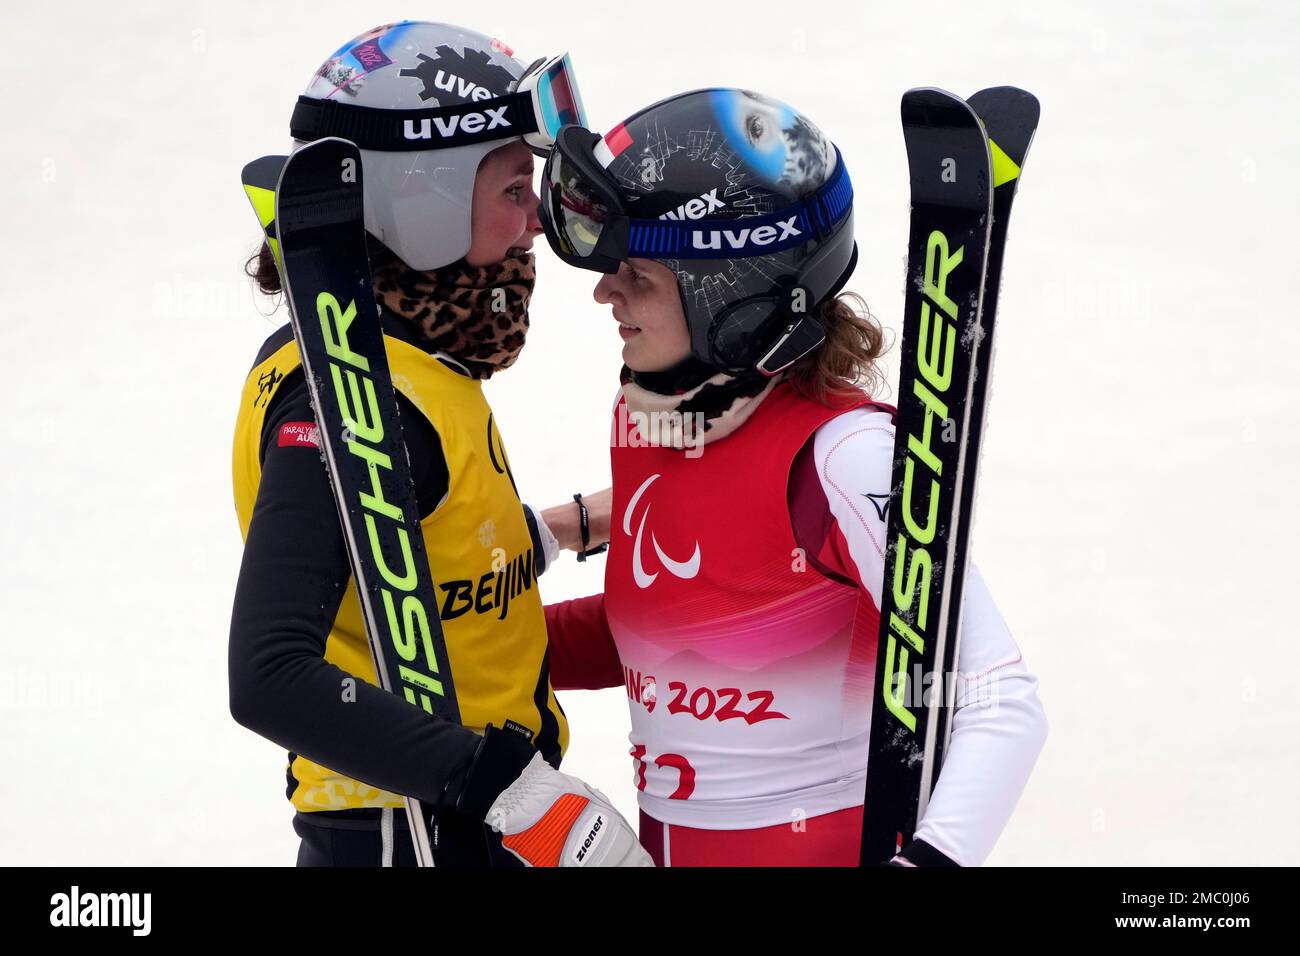 Veronika Aigner of Austria and guide Elisabeth Aigner celebrate after  competing in the women's giant slalom, vision impaired at the 2022 Winter  Paralympics, Friday, March 11, 2022, in the Yanqing district of